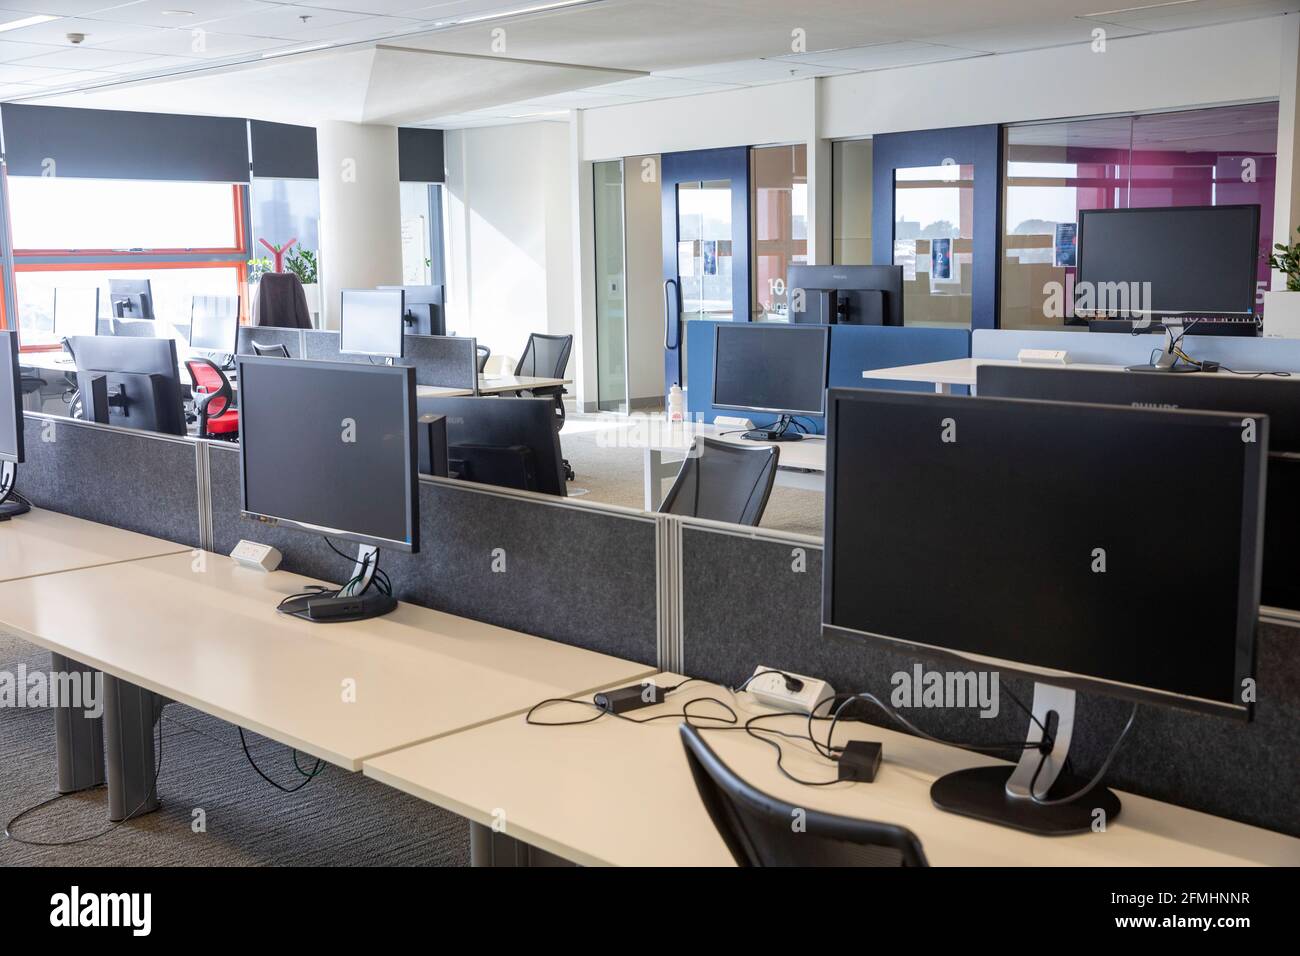 Sydney office building interior with empty desks and offices due to covid 19 virus pandemic requiring people and staff to work from home,Sydney Stock Photo